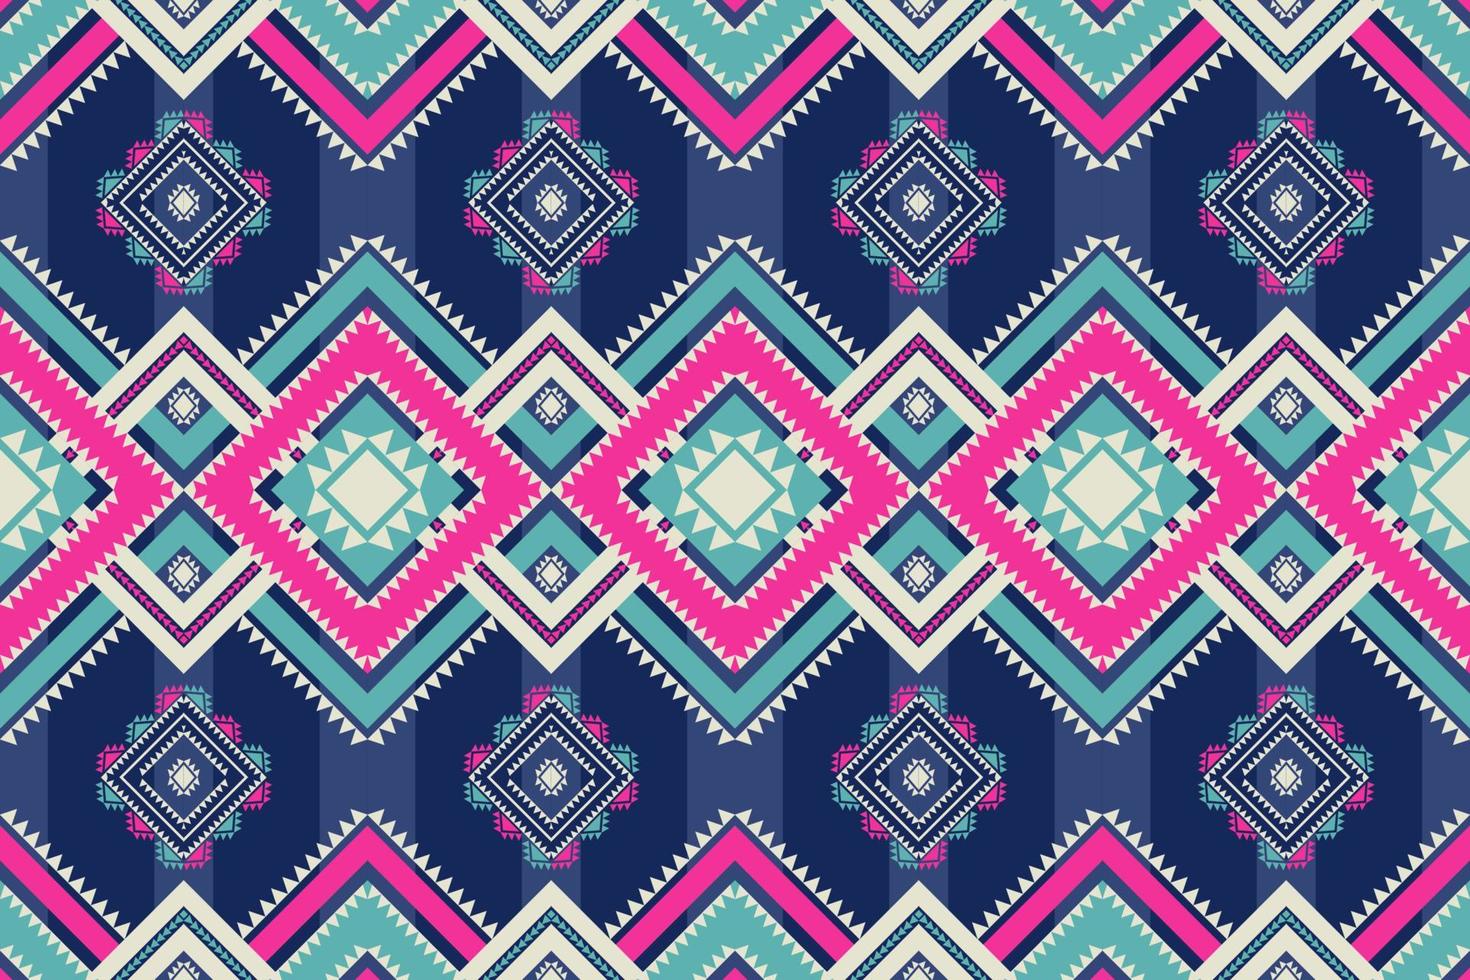 Ethnic geometric colorful pattern. Ethnic geometric square stripes shape seamless pattern. Colorful ethnic pattern use for fabric, textile, home decoration elements, upholstery, wrapping. vector